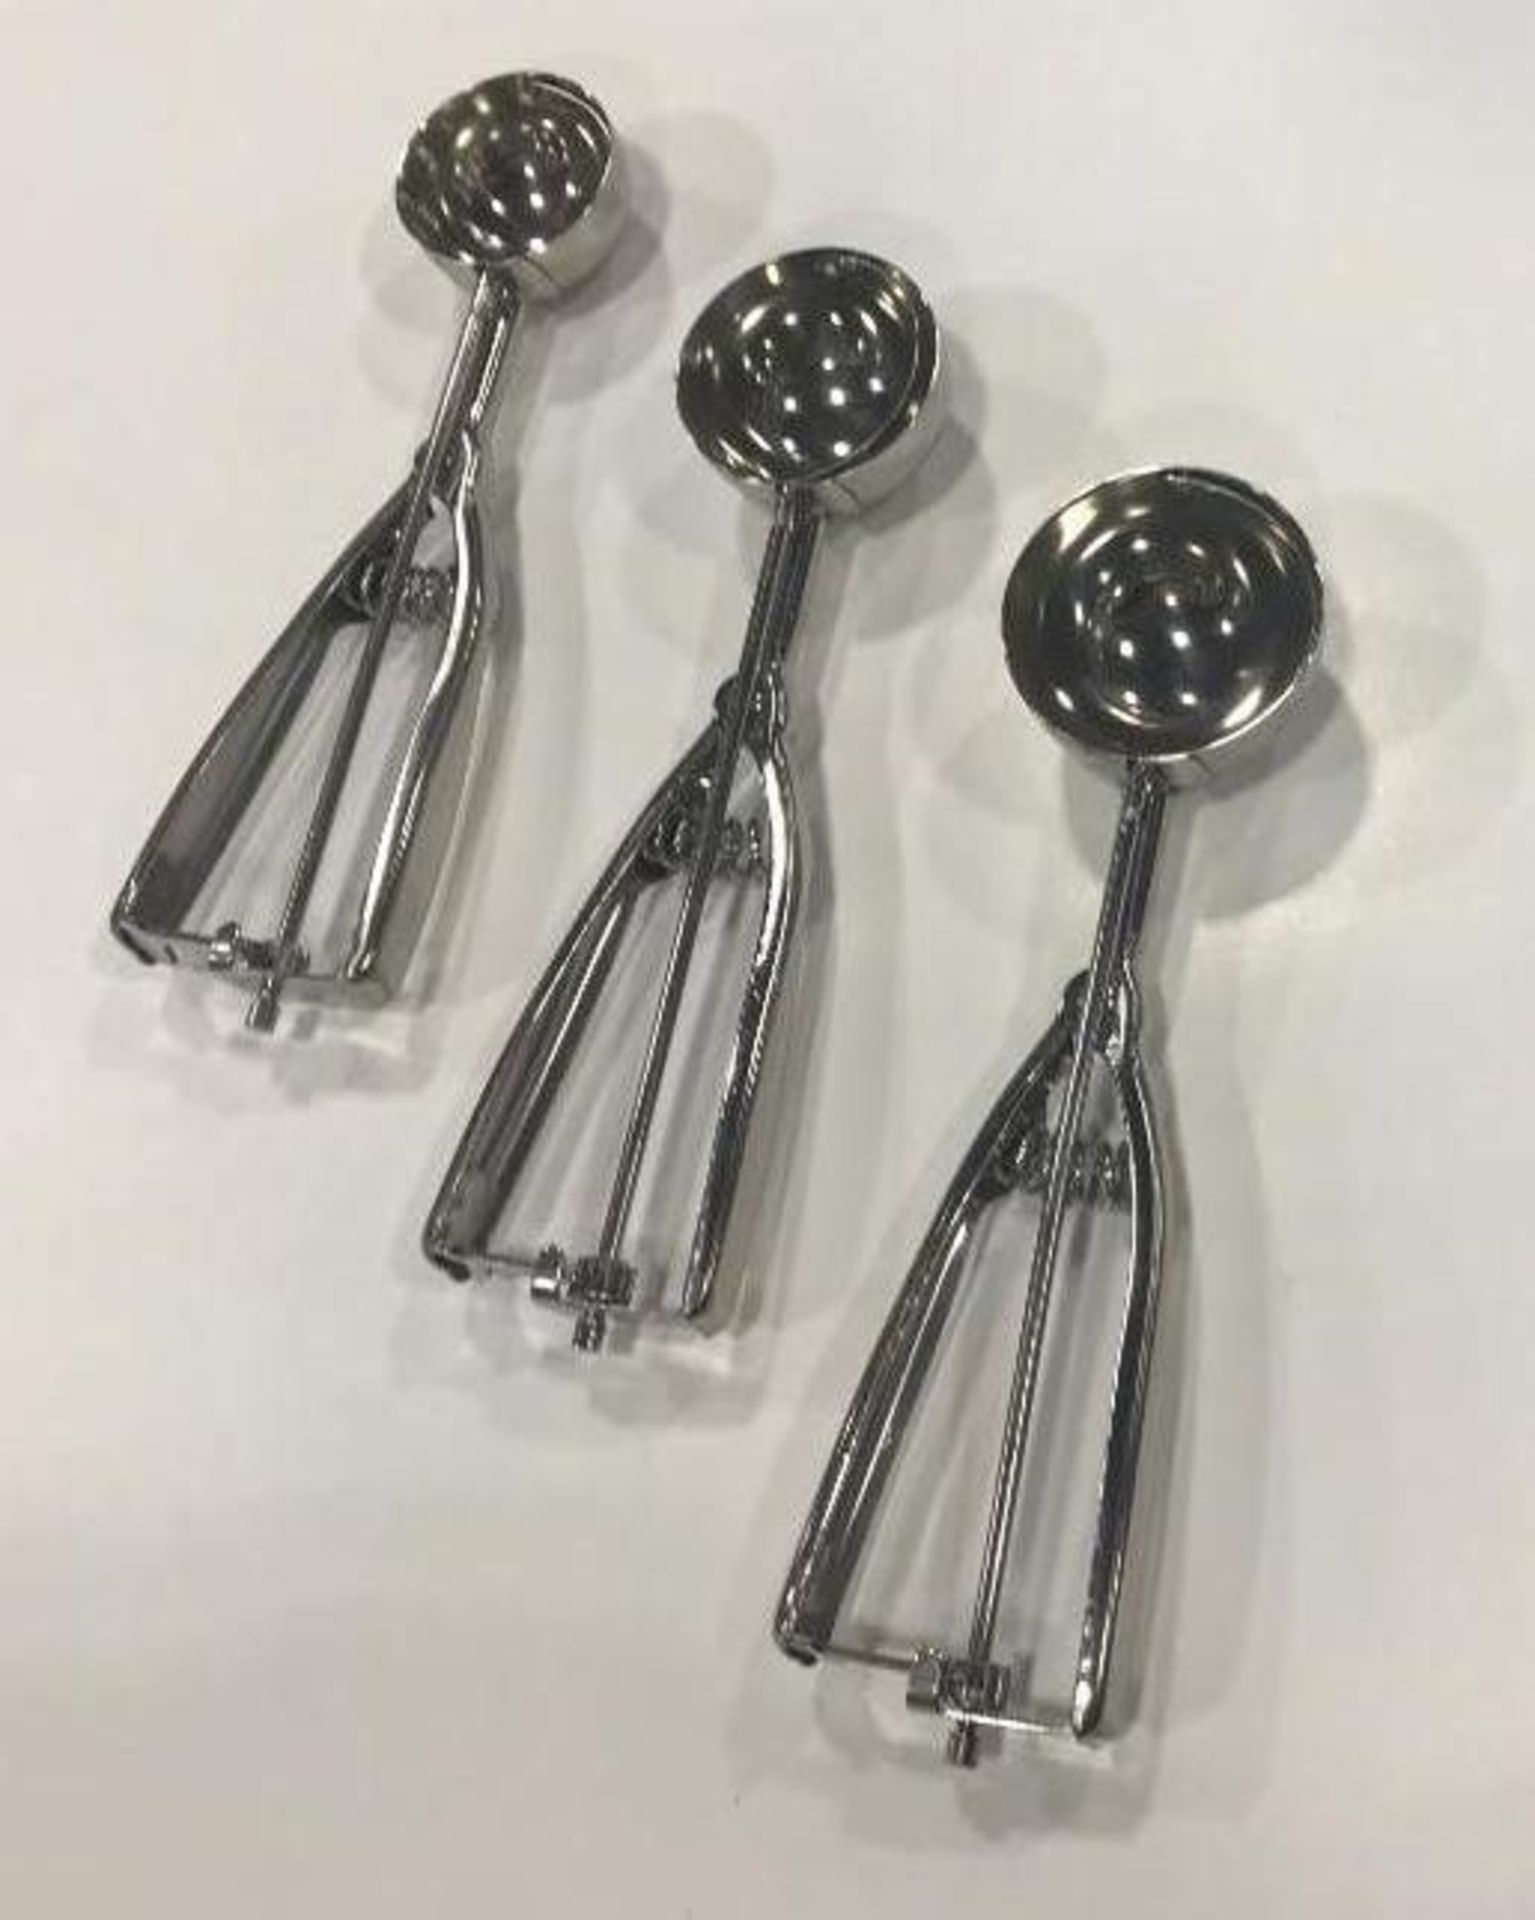 JOHNSON ROSE PORTION CONTROL SCOOPS - LOT OF 3 - NEW - Image 3 of 3